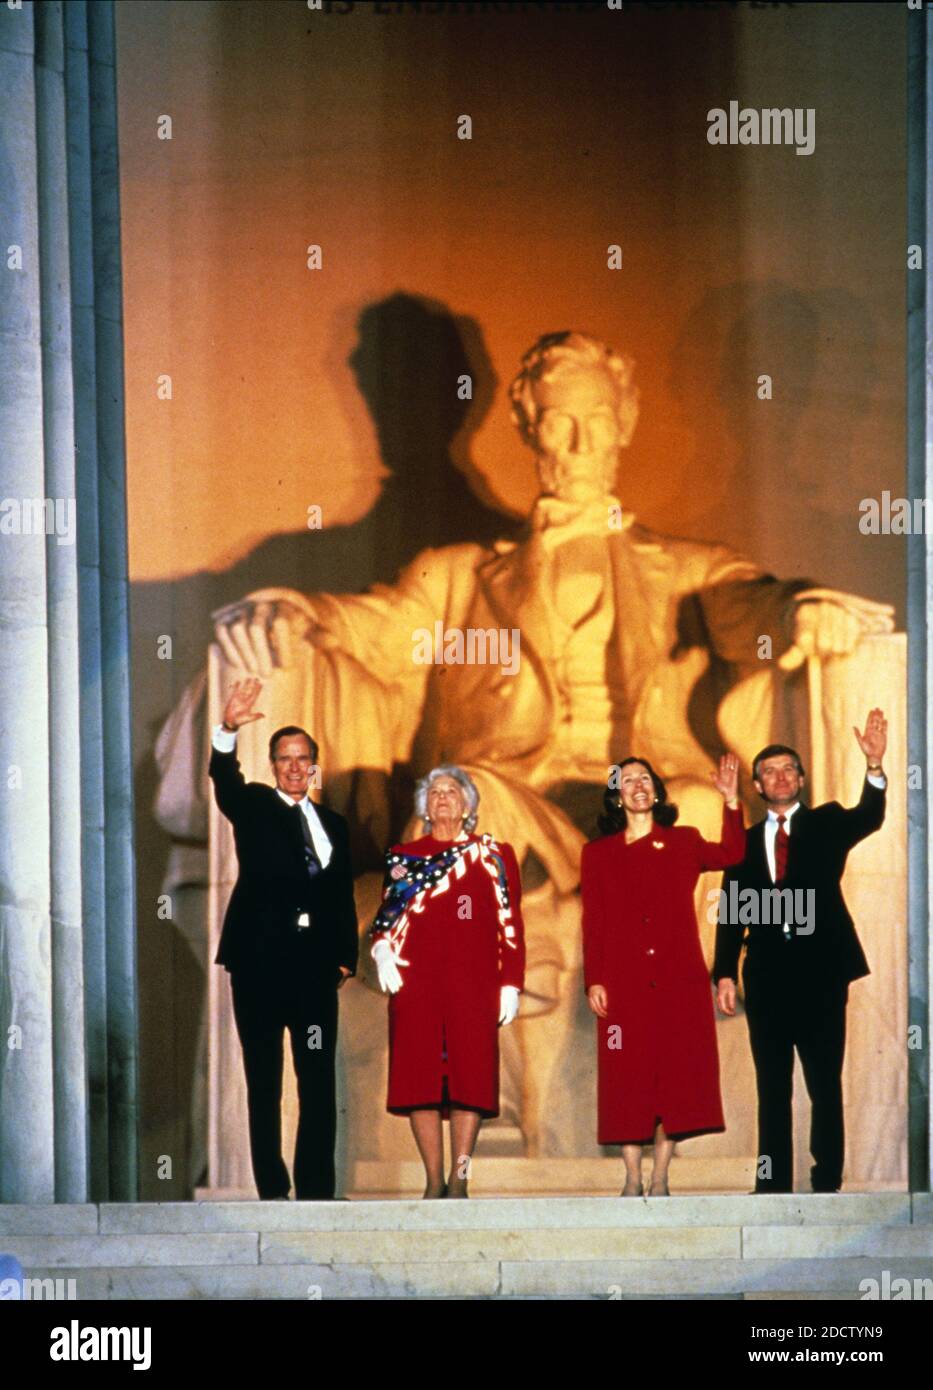 United States President-elect George H.W. Bush attends the opening ceremony for his inauguration at the Lincoln Memorial in Washington, DC on January 18 1989. From left to right: President-elect Bush, Barbara Bush, Marilyn Quayle, and US Vice President-elect Dan Quayle.Credit: Robert Trippett / Pool via CNP /ABACAPRESS.COM Stock Photo